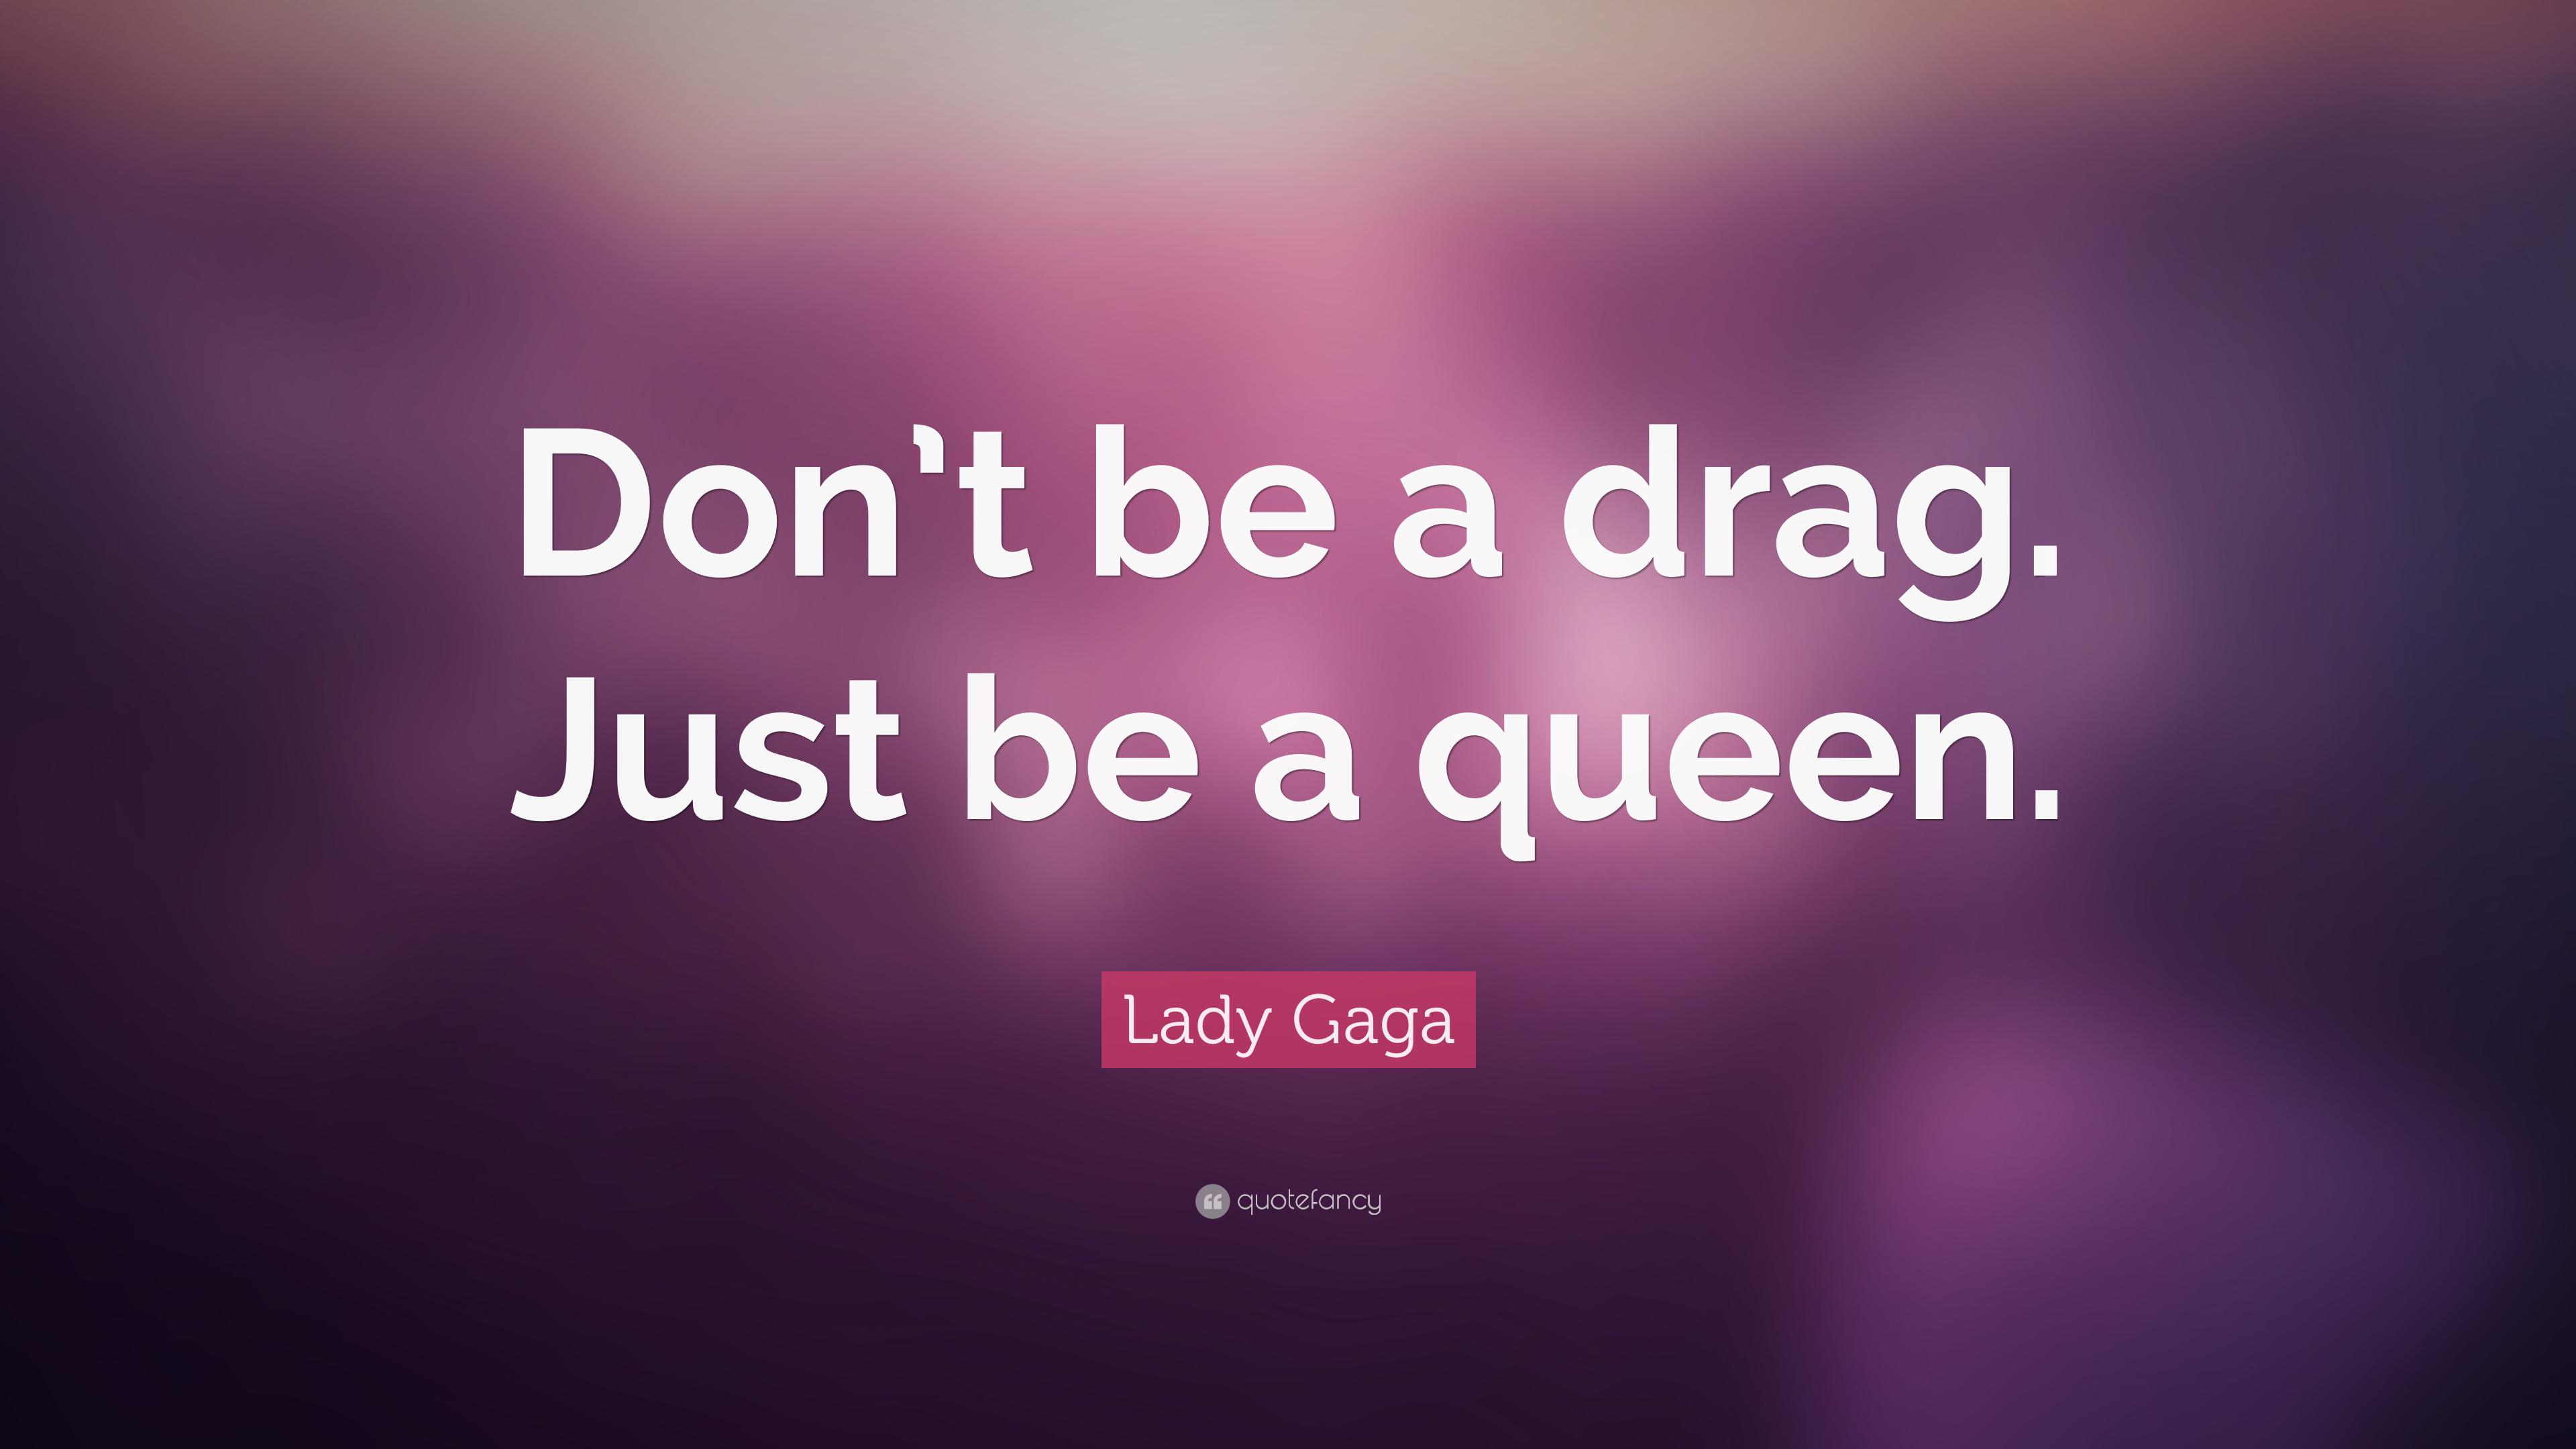 Lady Gaga Quote: “Don't be a drag. Just be a queen.” 14 wallpaper